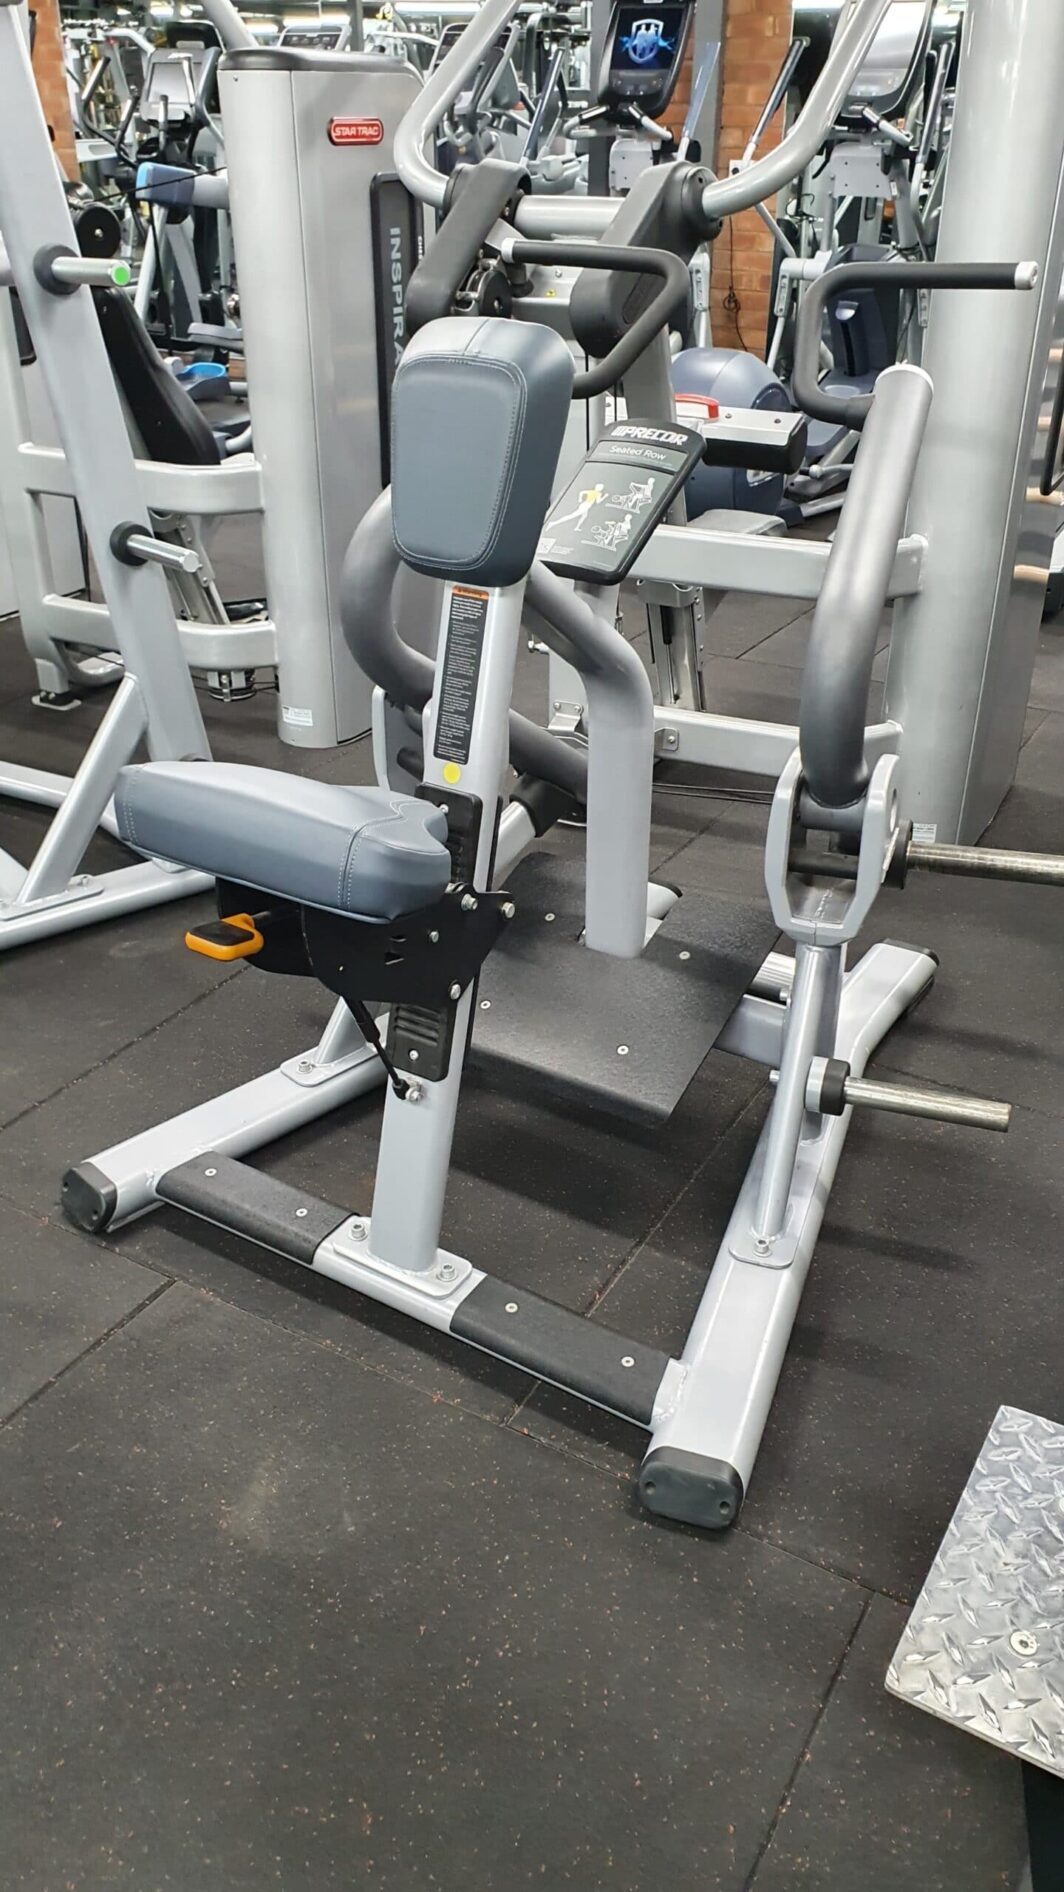 Precor Discovery Plated Loaded Seated Row gym equipment